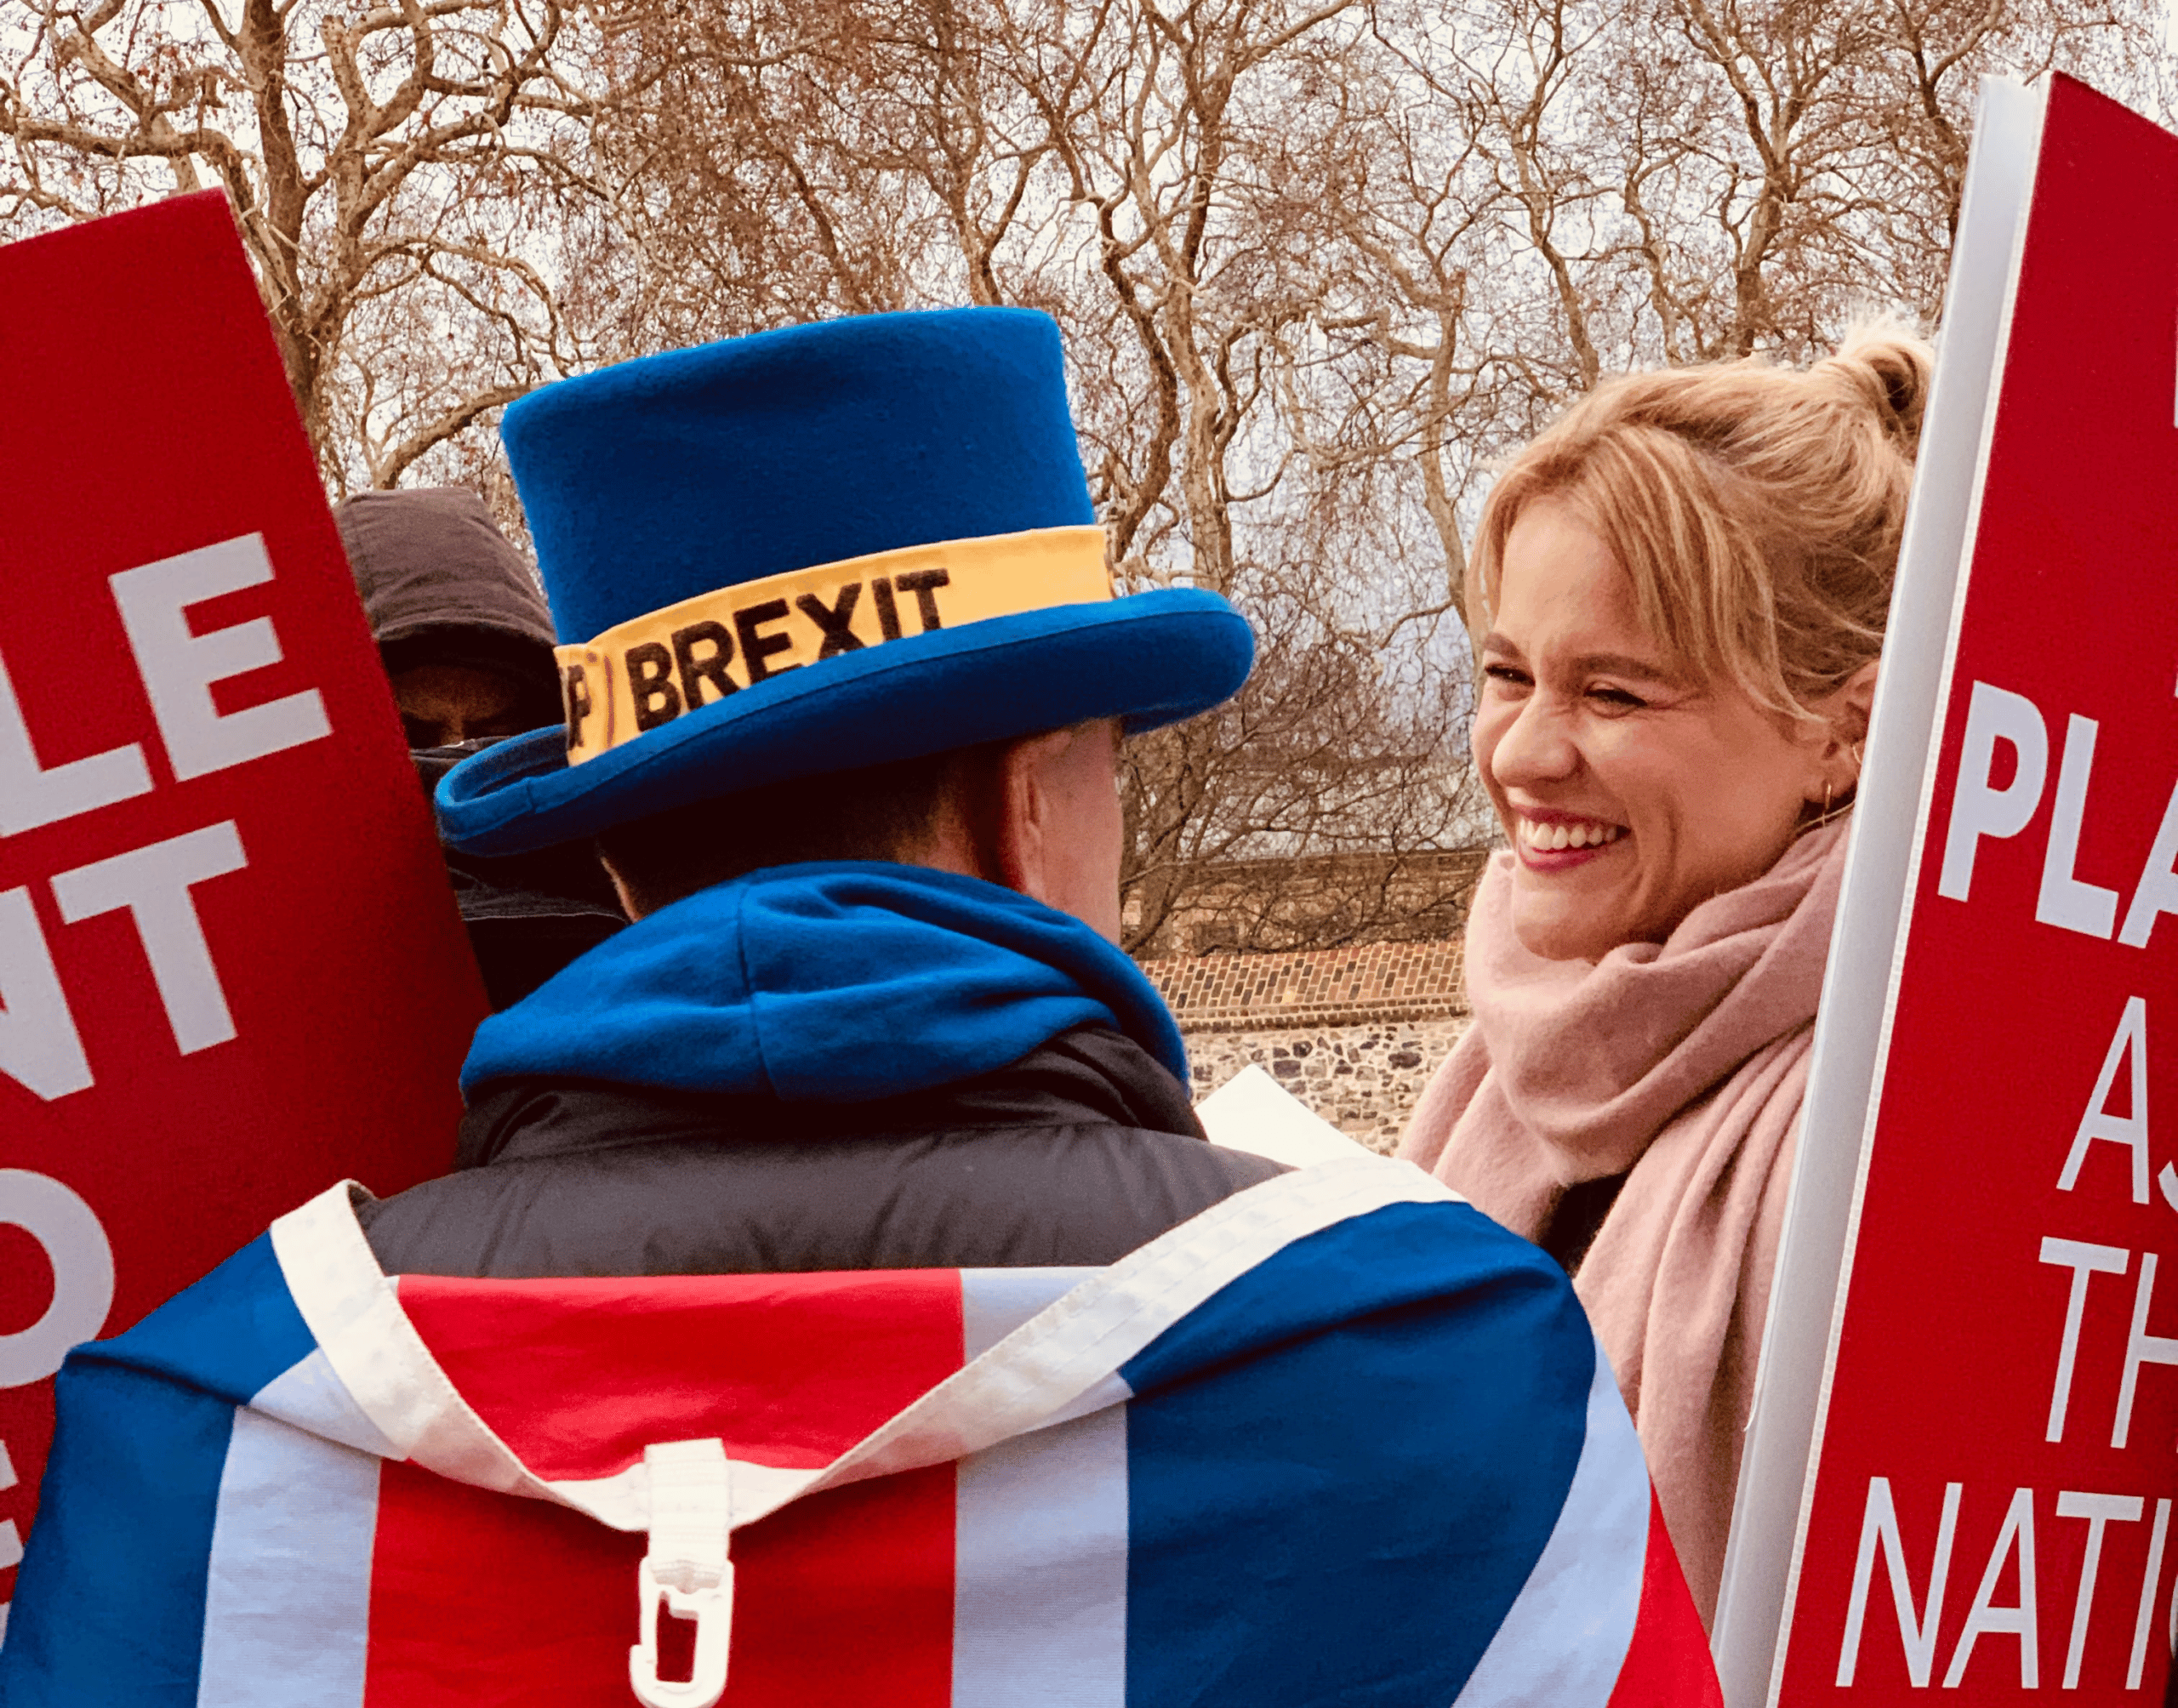 man holding signs with brexit hat on